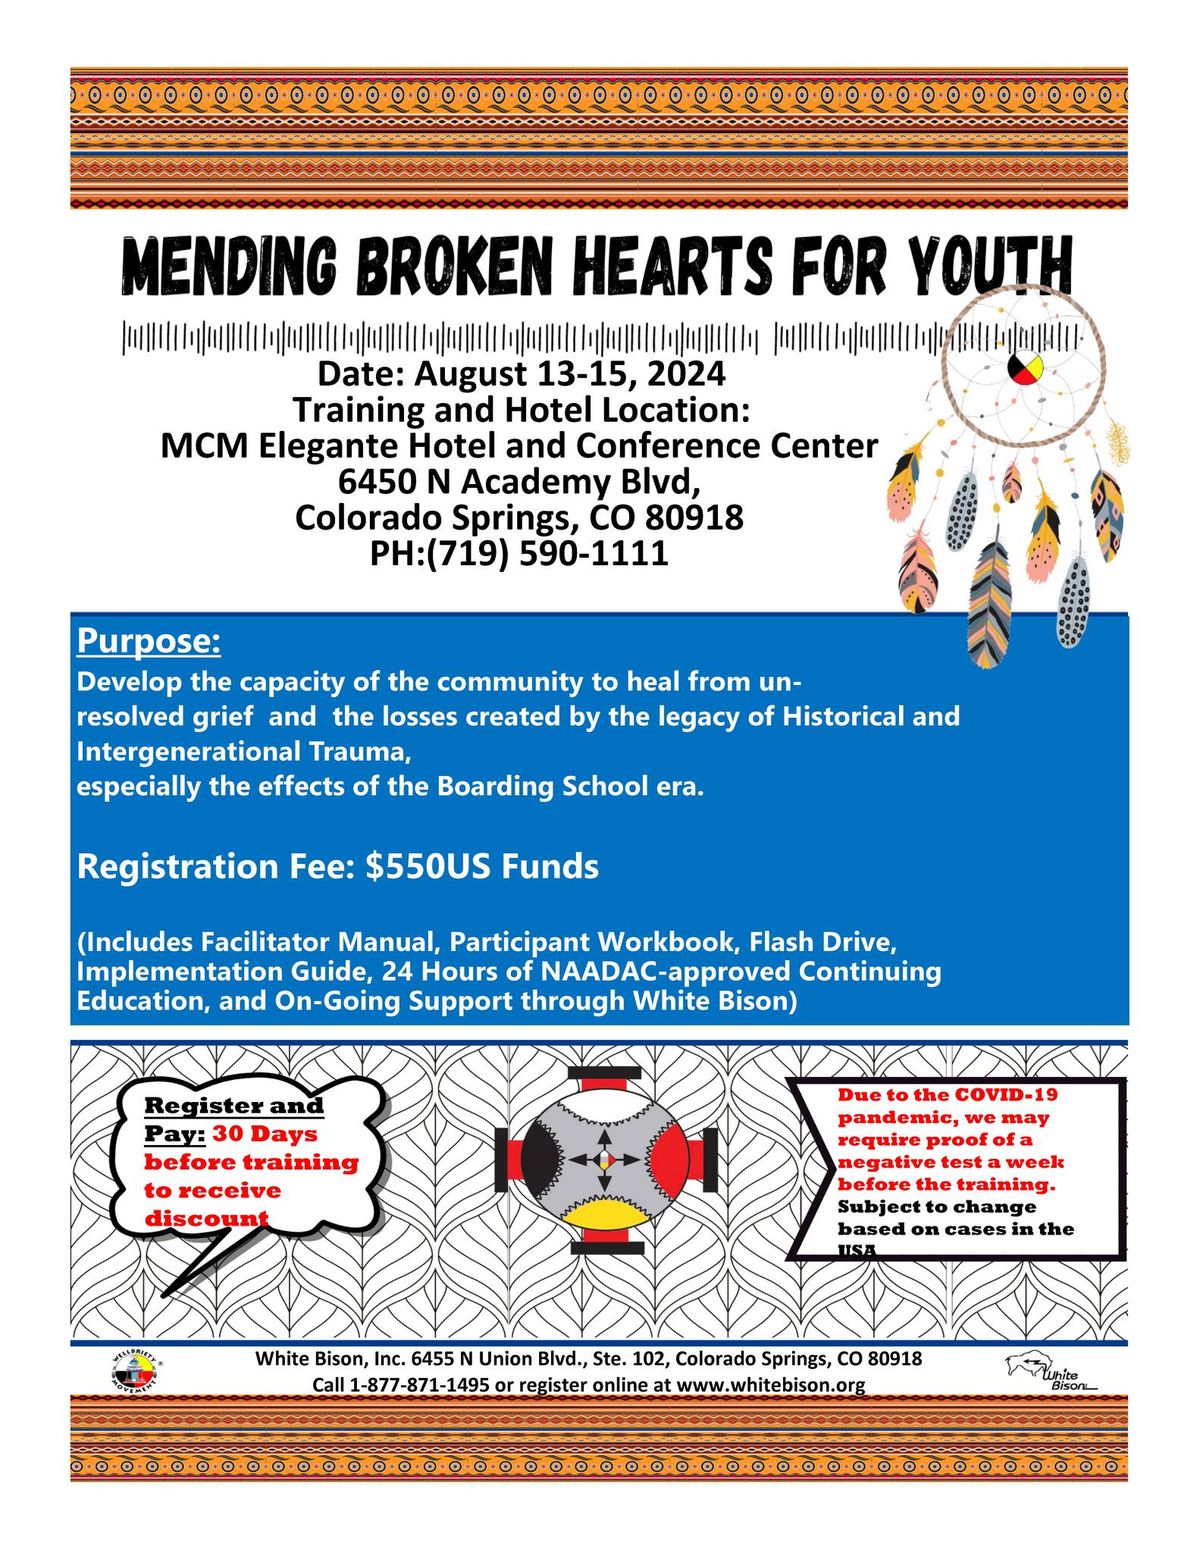 Mending Broken Hearts for Youth